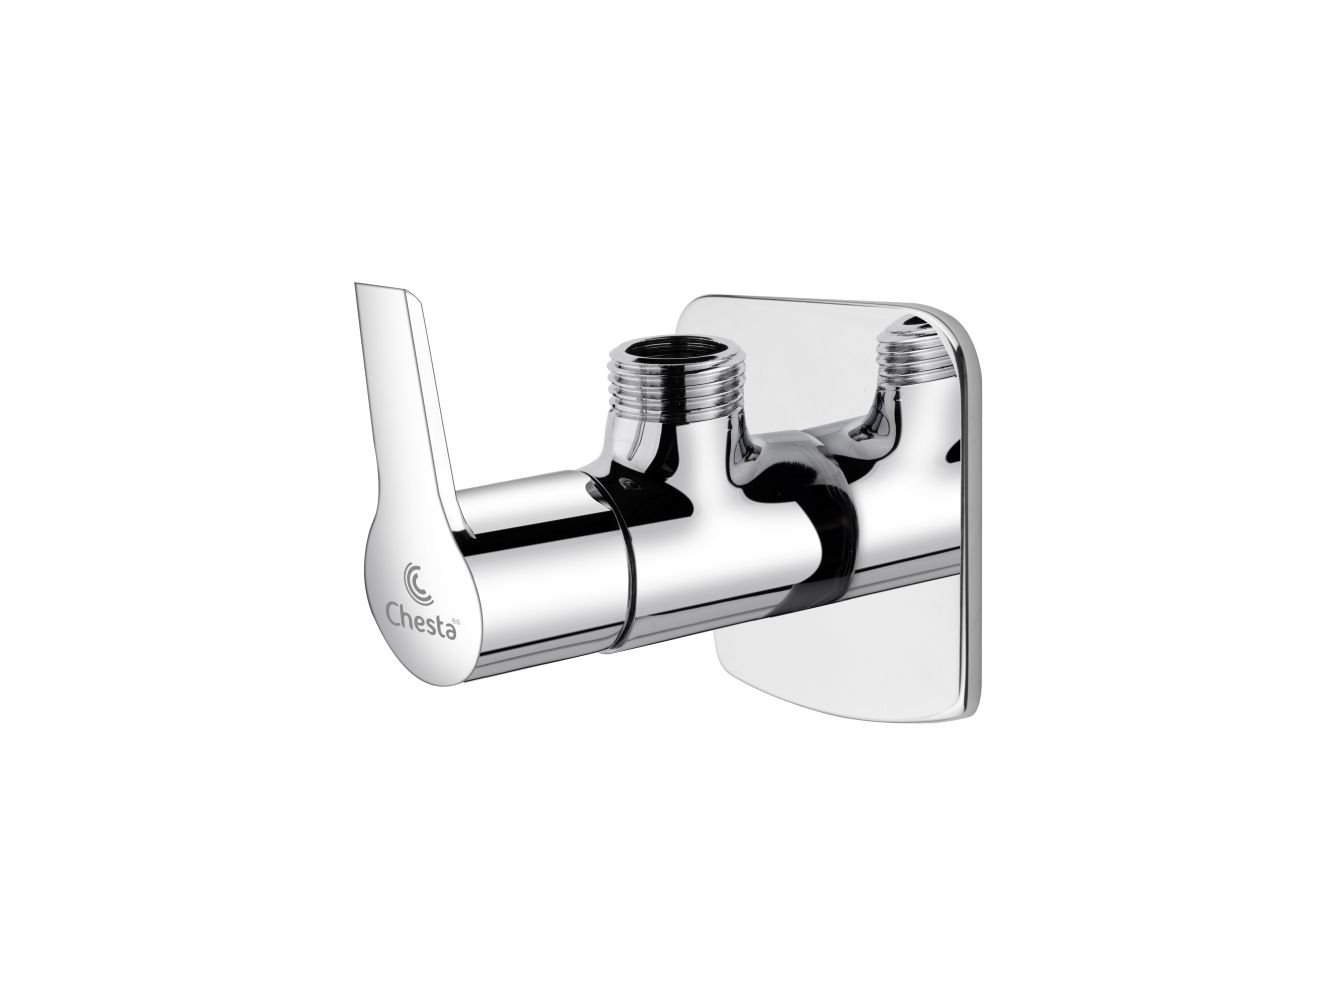 Angle Cock with Wall Flange by Chesta Bath Fittings